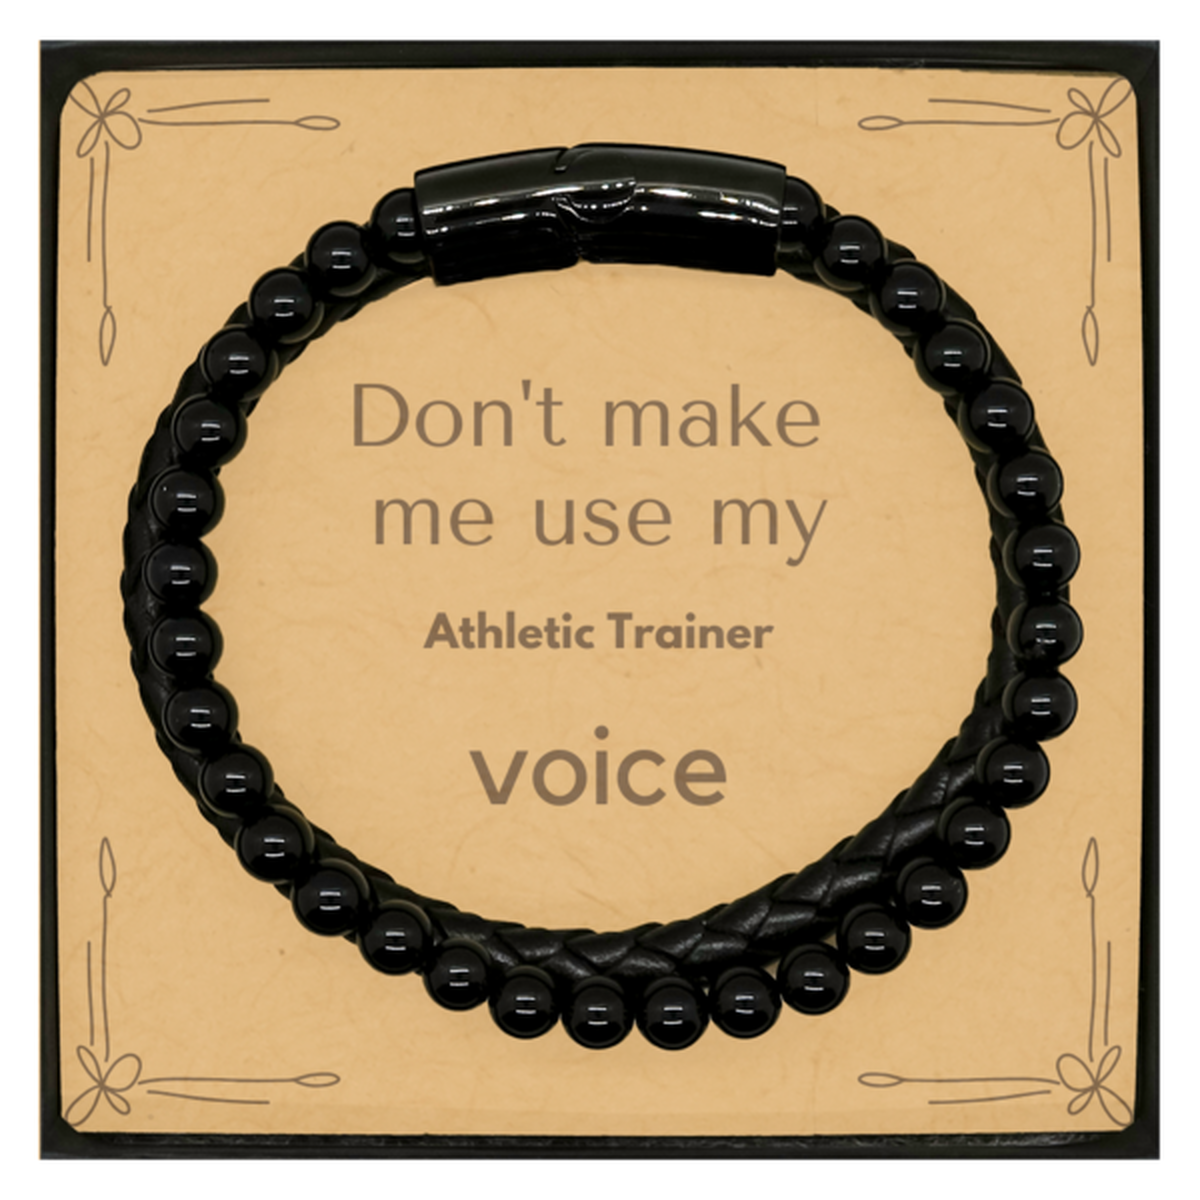 Don't make me use my Athletic Trainer voice, Sarcasm Athletic Trainer Card Gifts, Christmas Athletic Trainer Stone Leather Bracelets Birthday Unique Gifts For Athletic Trainer Coworkers, Men, Women, Colleague, Friends